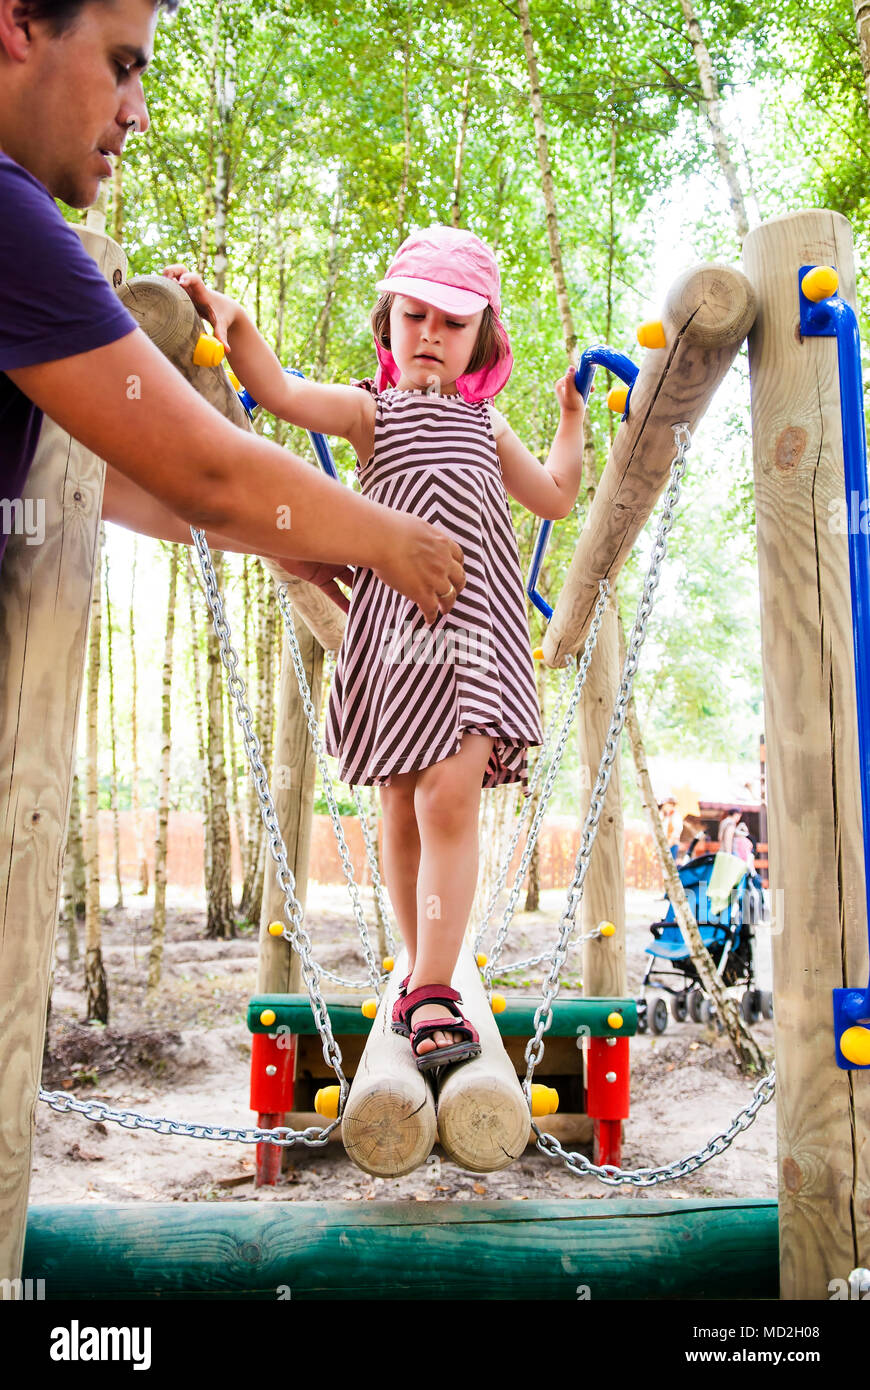 Father helping her daughter cross balance beam on playground, spending time together. Stock Photo